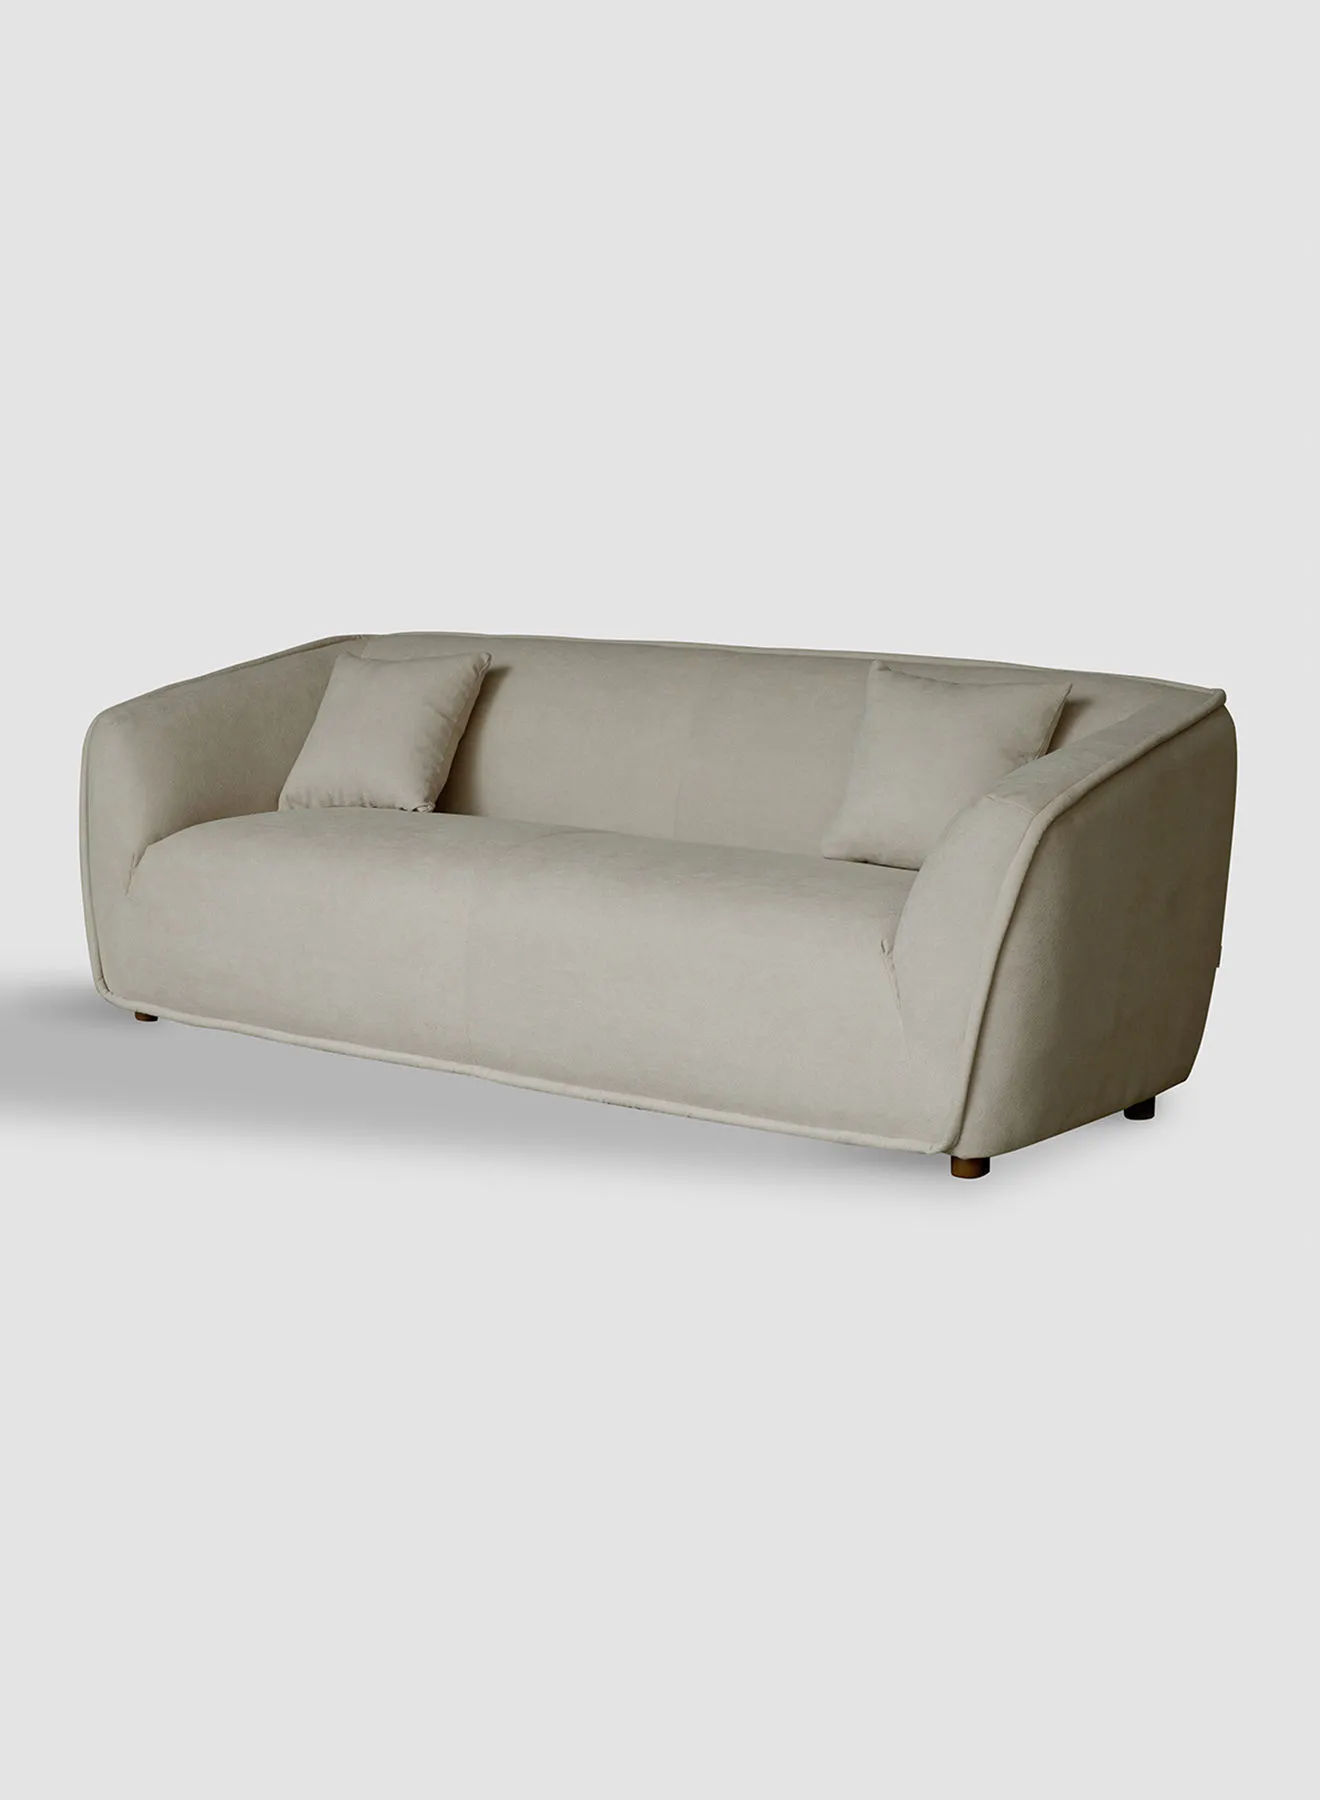 Switch Sofa - Upholstered Fabric Beige Wood Couch - 2150 X 860 X 740 - 3 Seater Sofa Relaxing Sofa